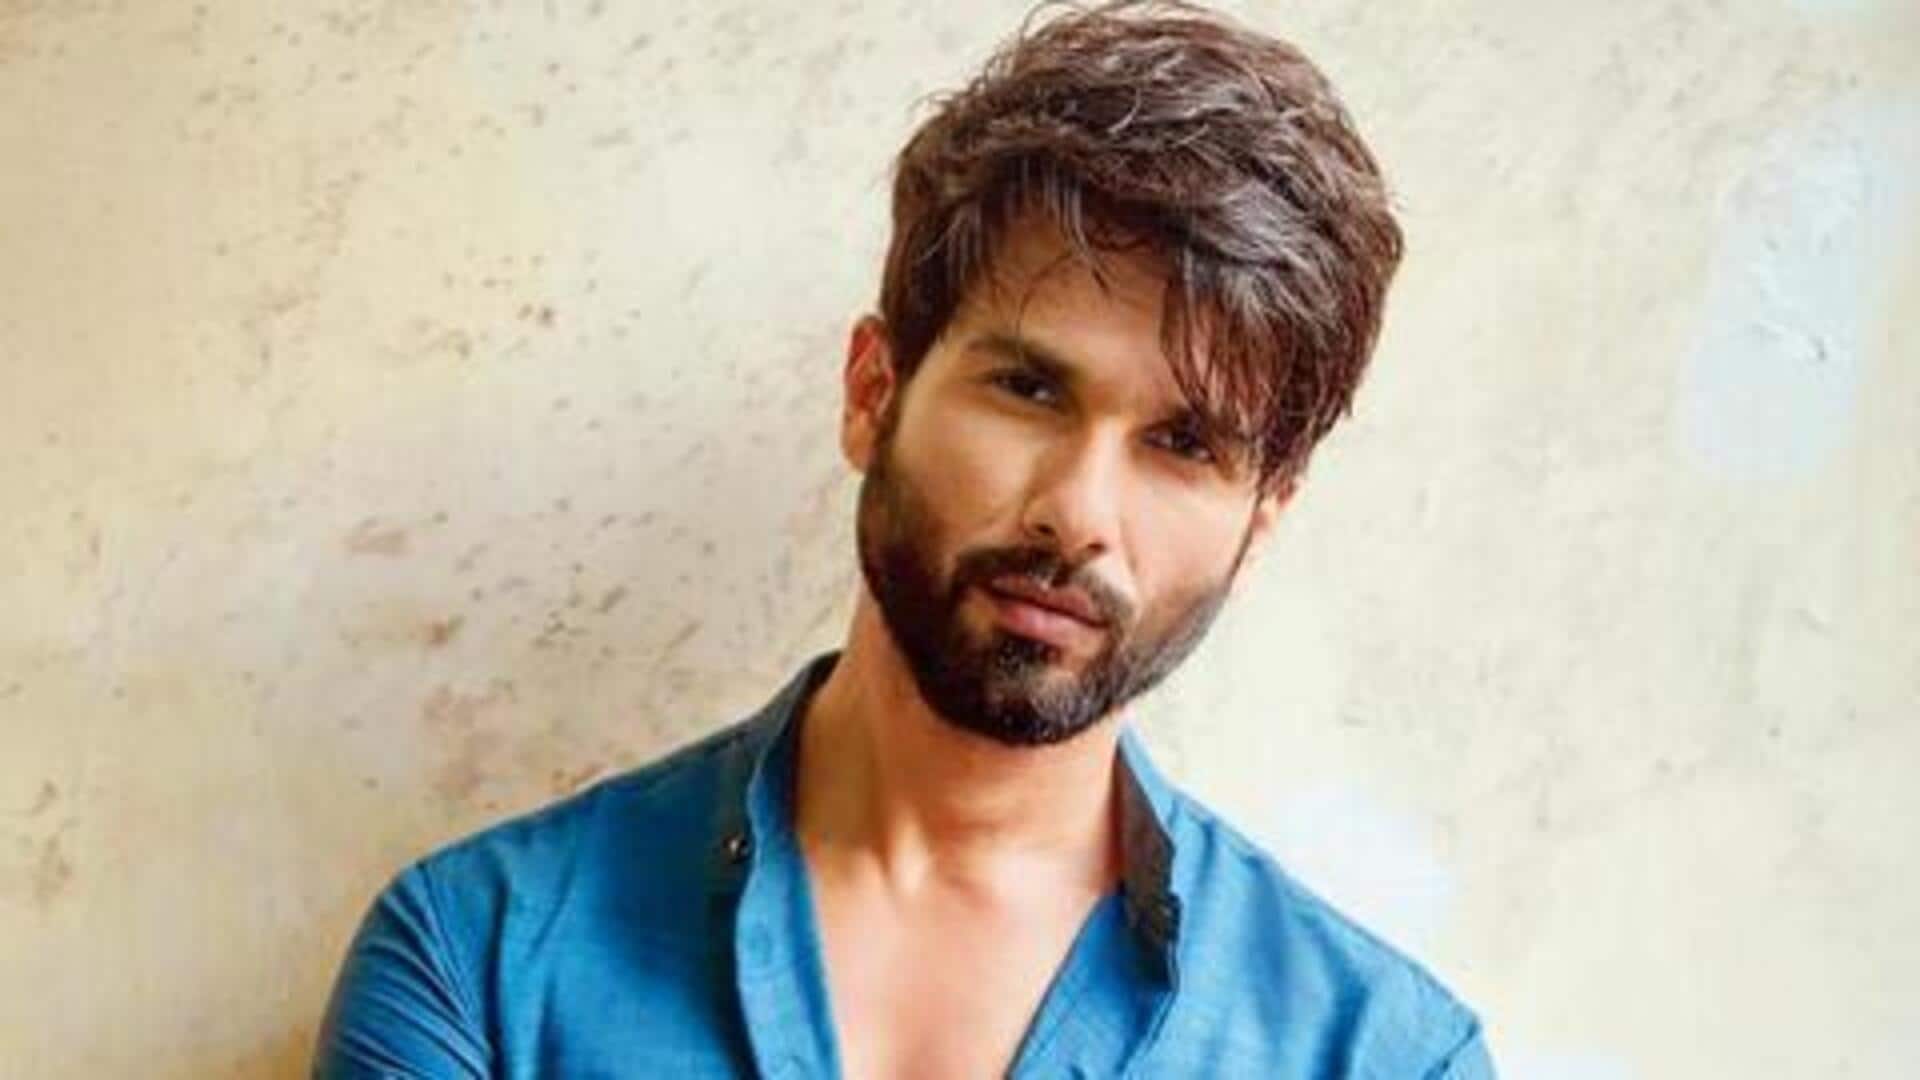 'Deva': Shahid Kapoor exudes machismo in BTS photograph from sets